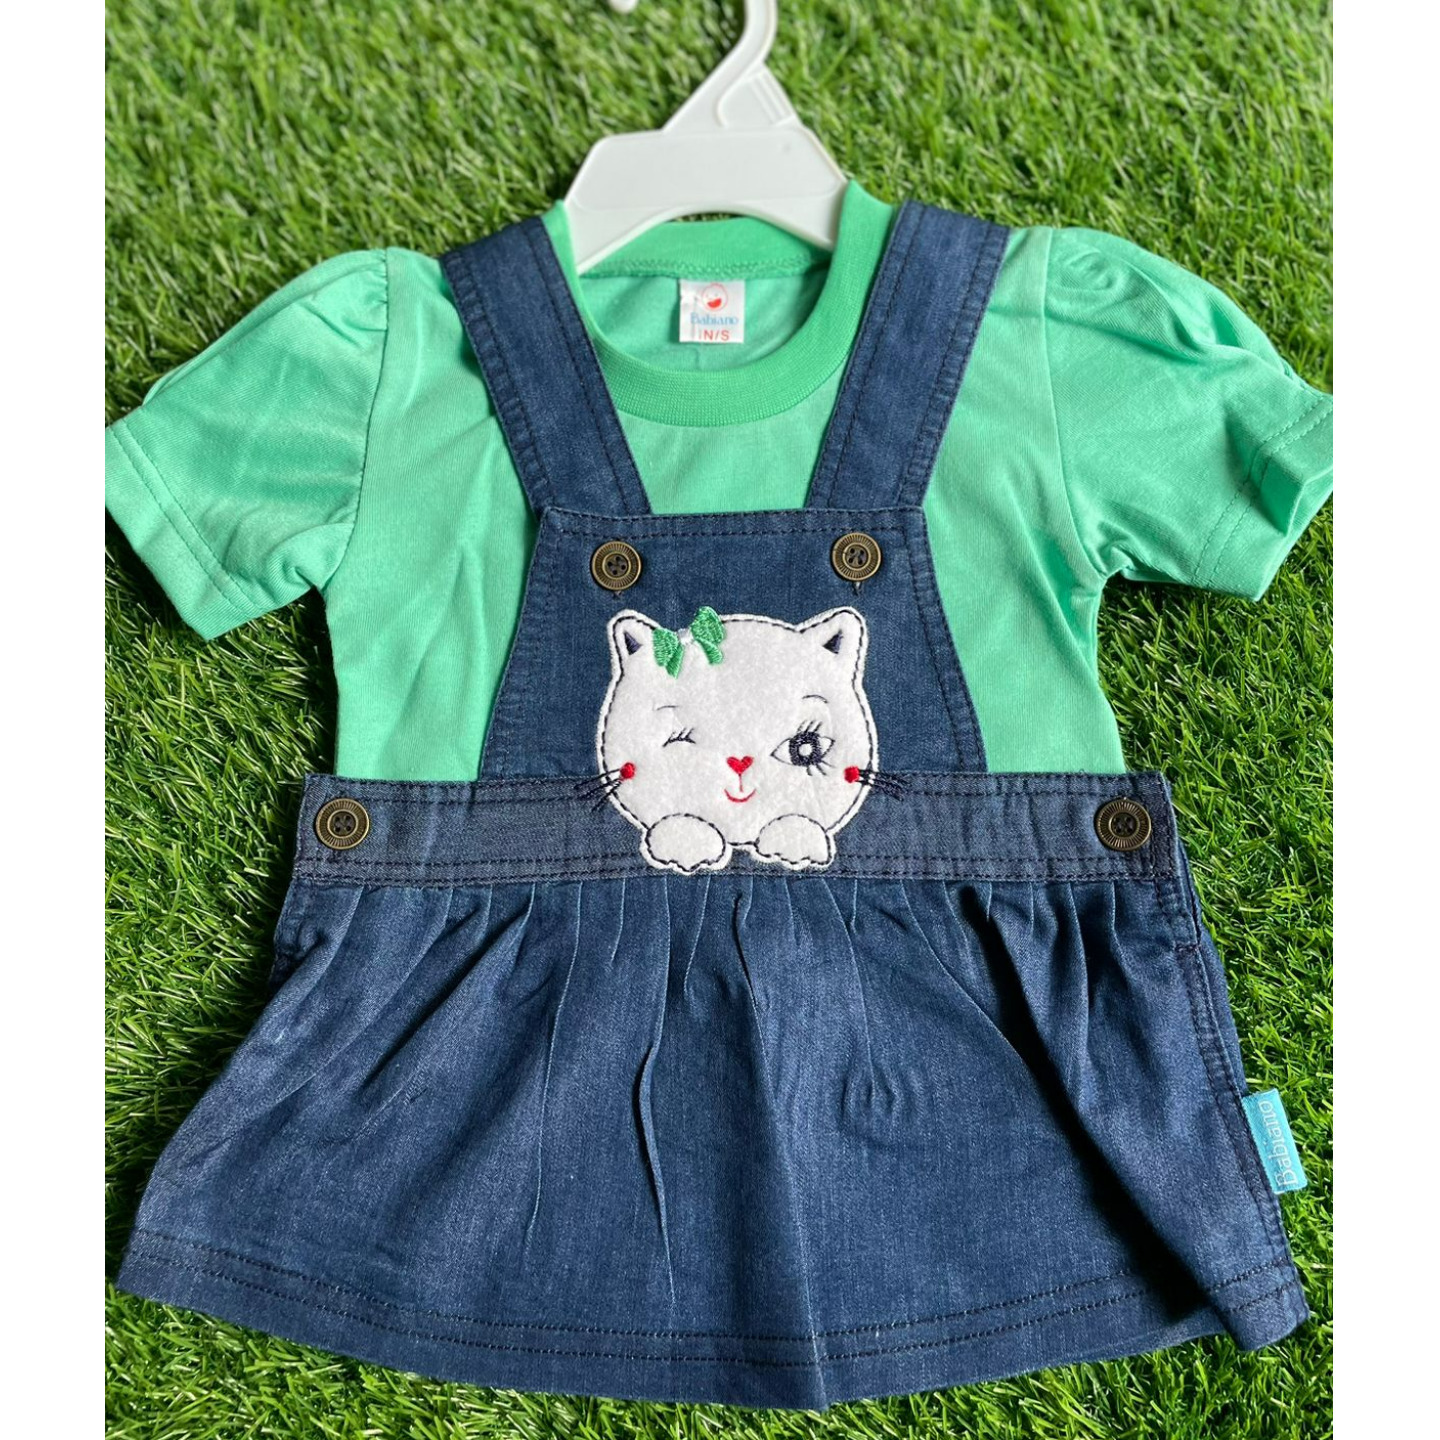 Newborn Infant Kids Babiano Pinafore Set Rs 700 2 Months-3.5 Years